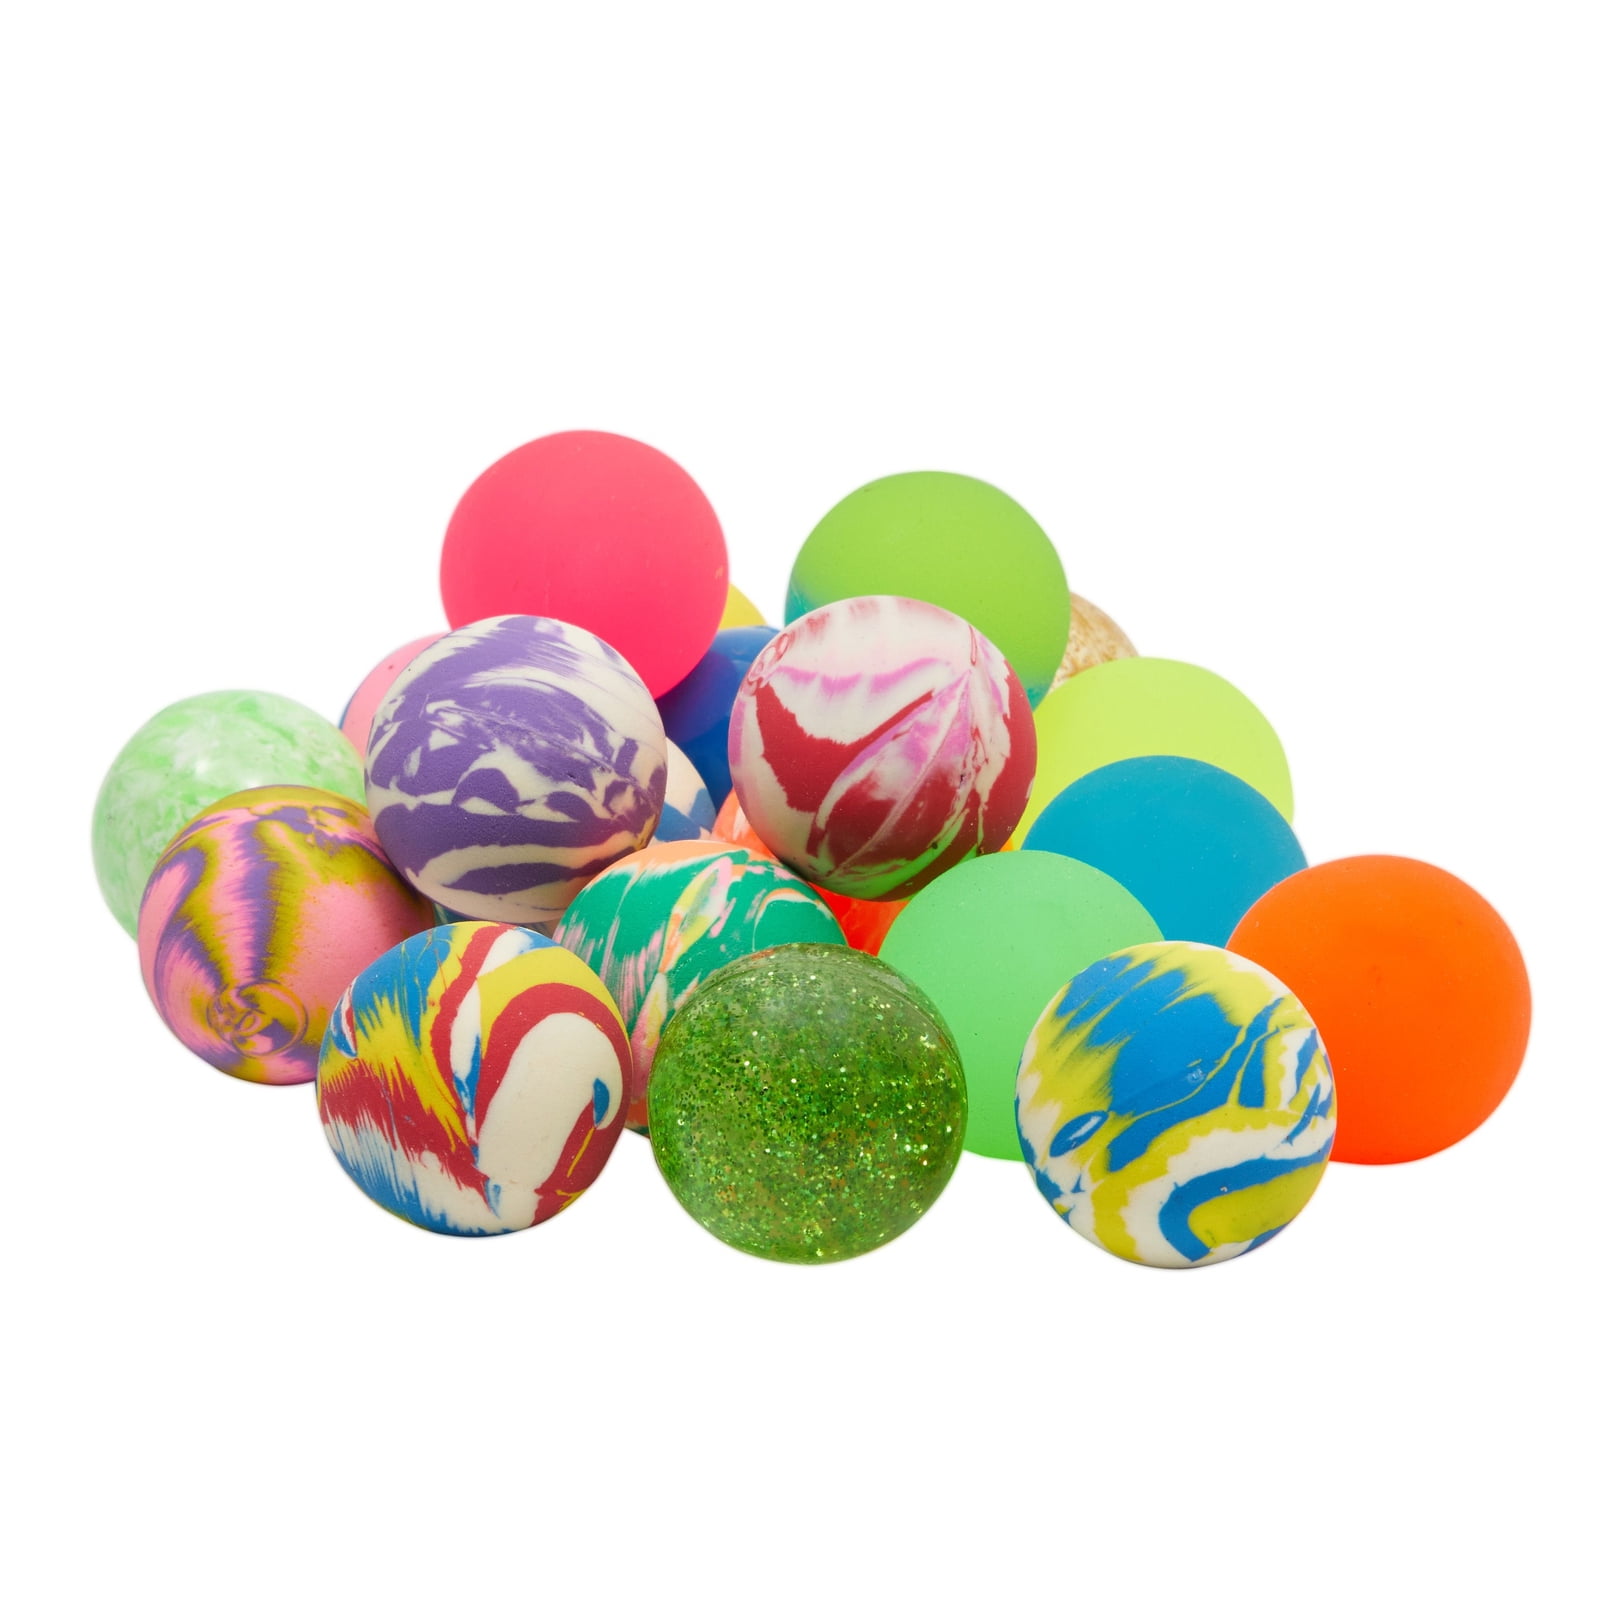 Pack of 50 19 mm 3/4 inch Super Bouncy Balls 